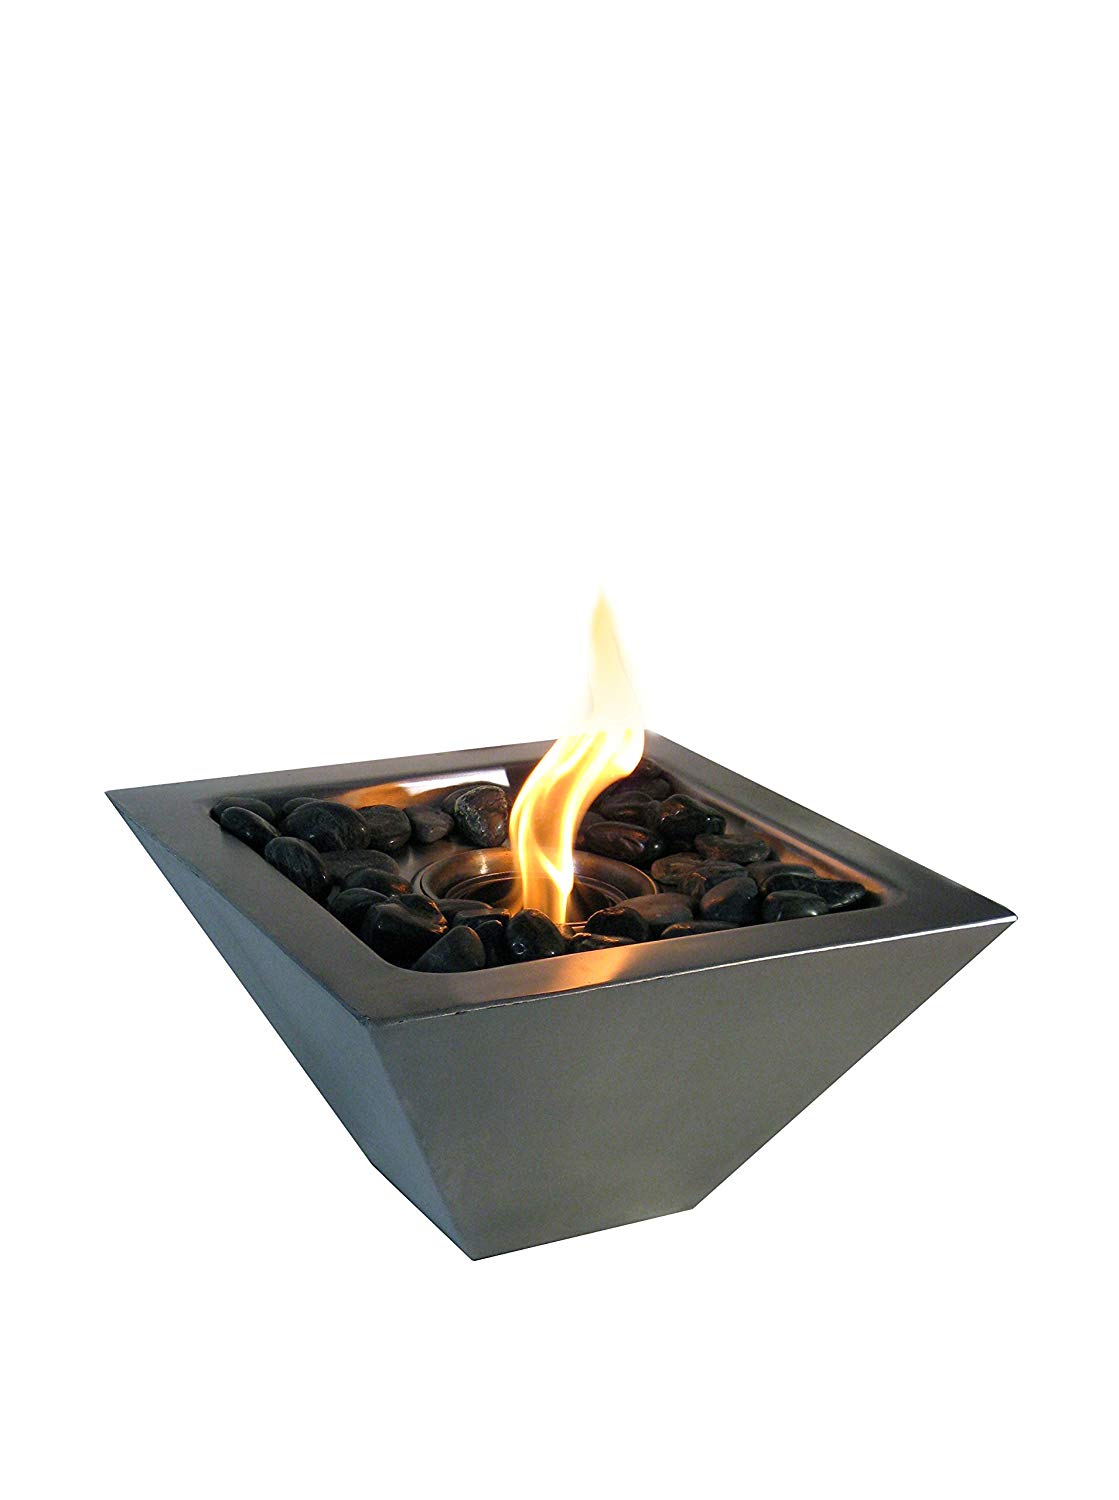 Stainless Steel Fireplace Insert Fresh Anywhere Fireplace Table top Ethanol Fireplace Brushed Stainless